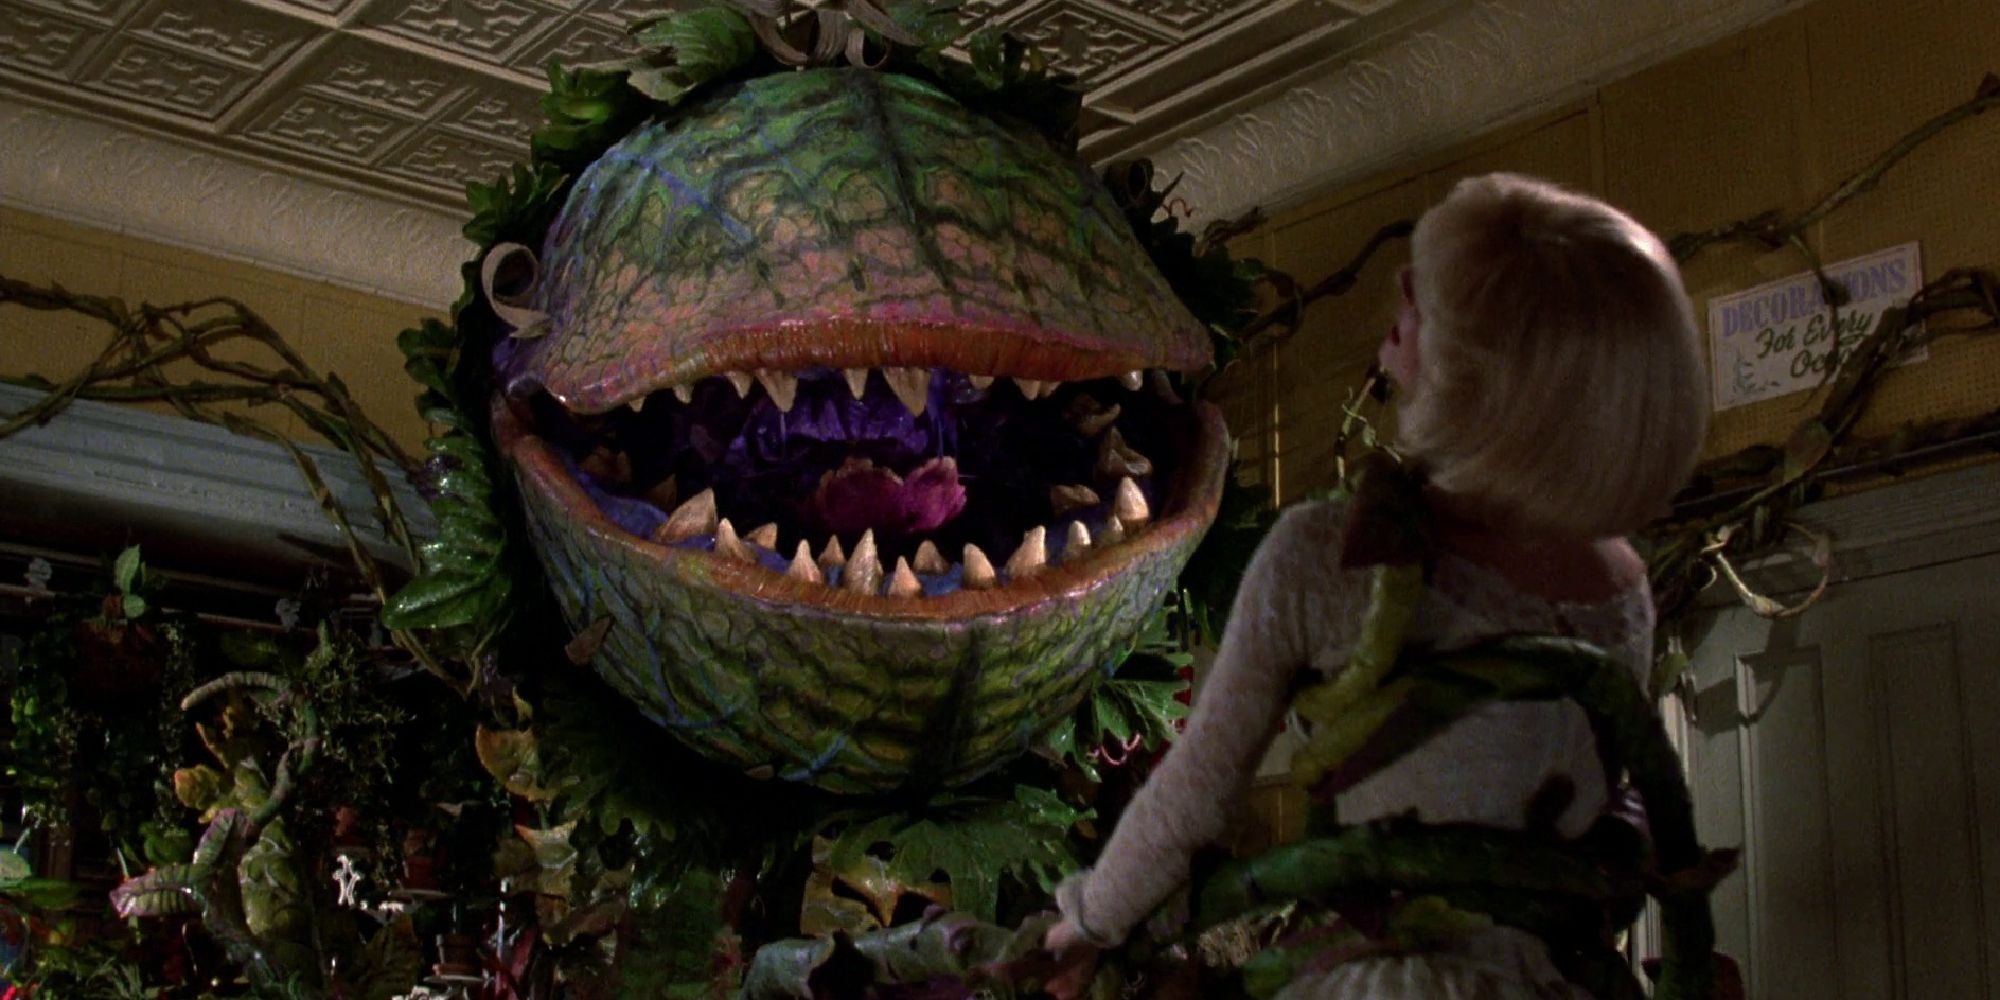 Audrey II grabbing Audrey with its vines in Little Shop of Horrors